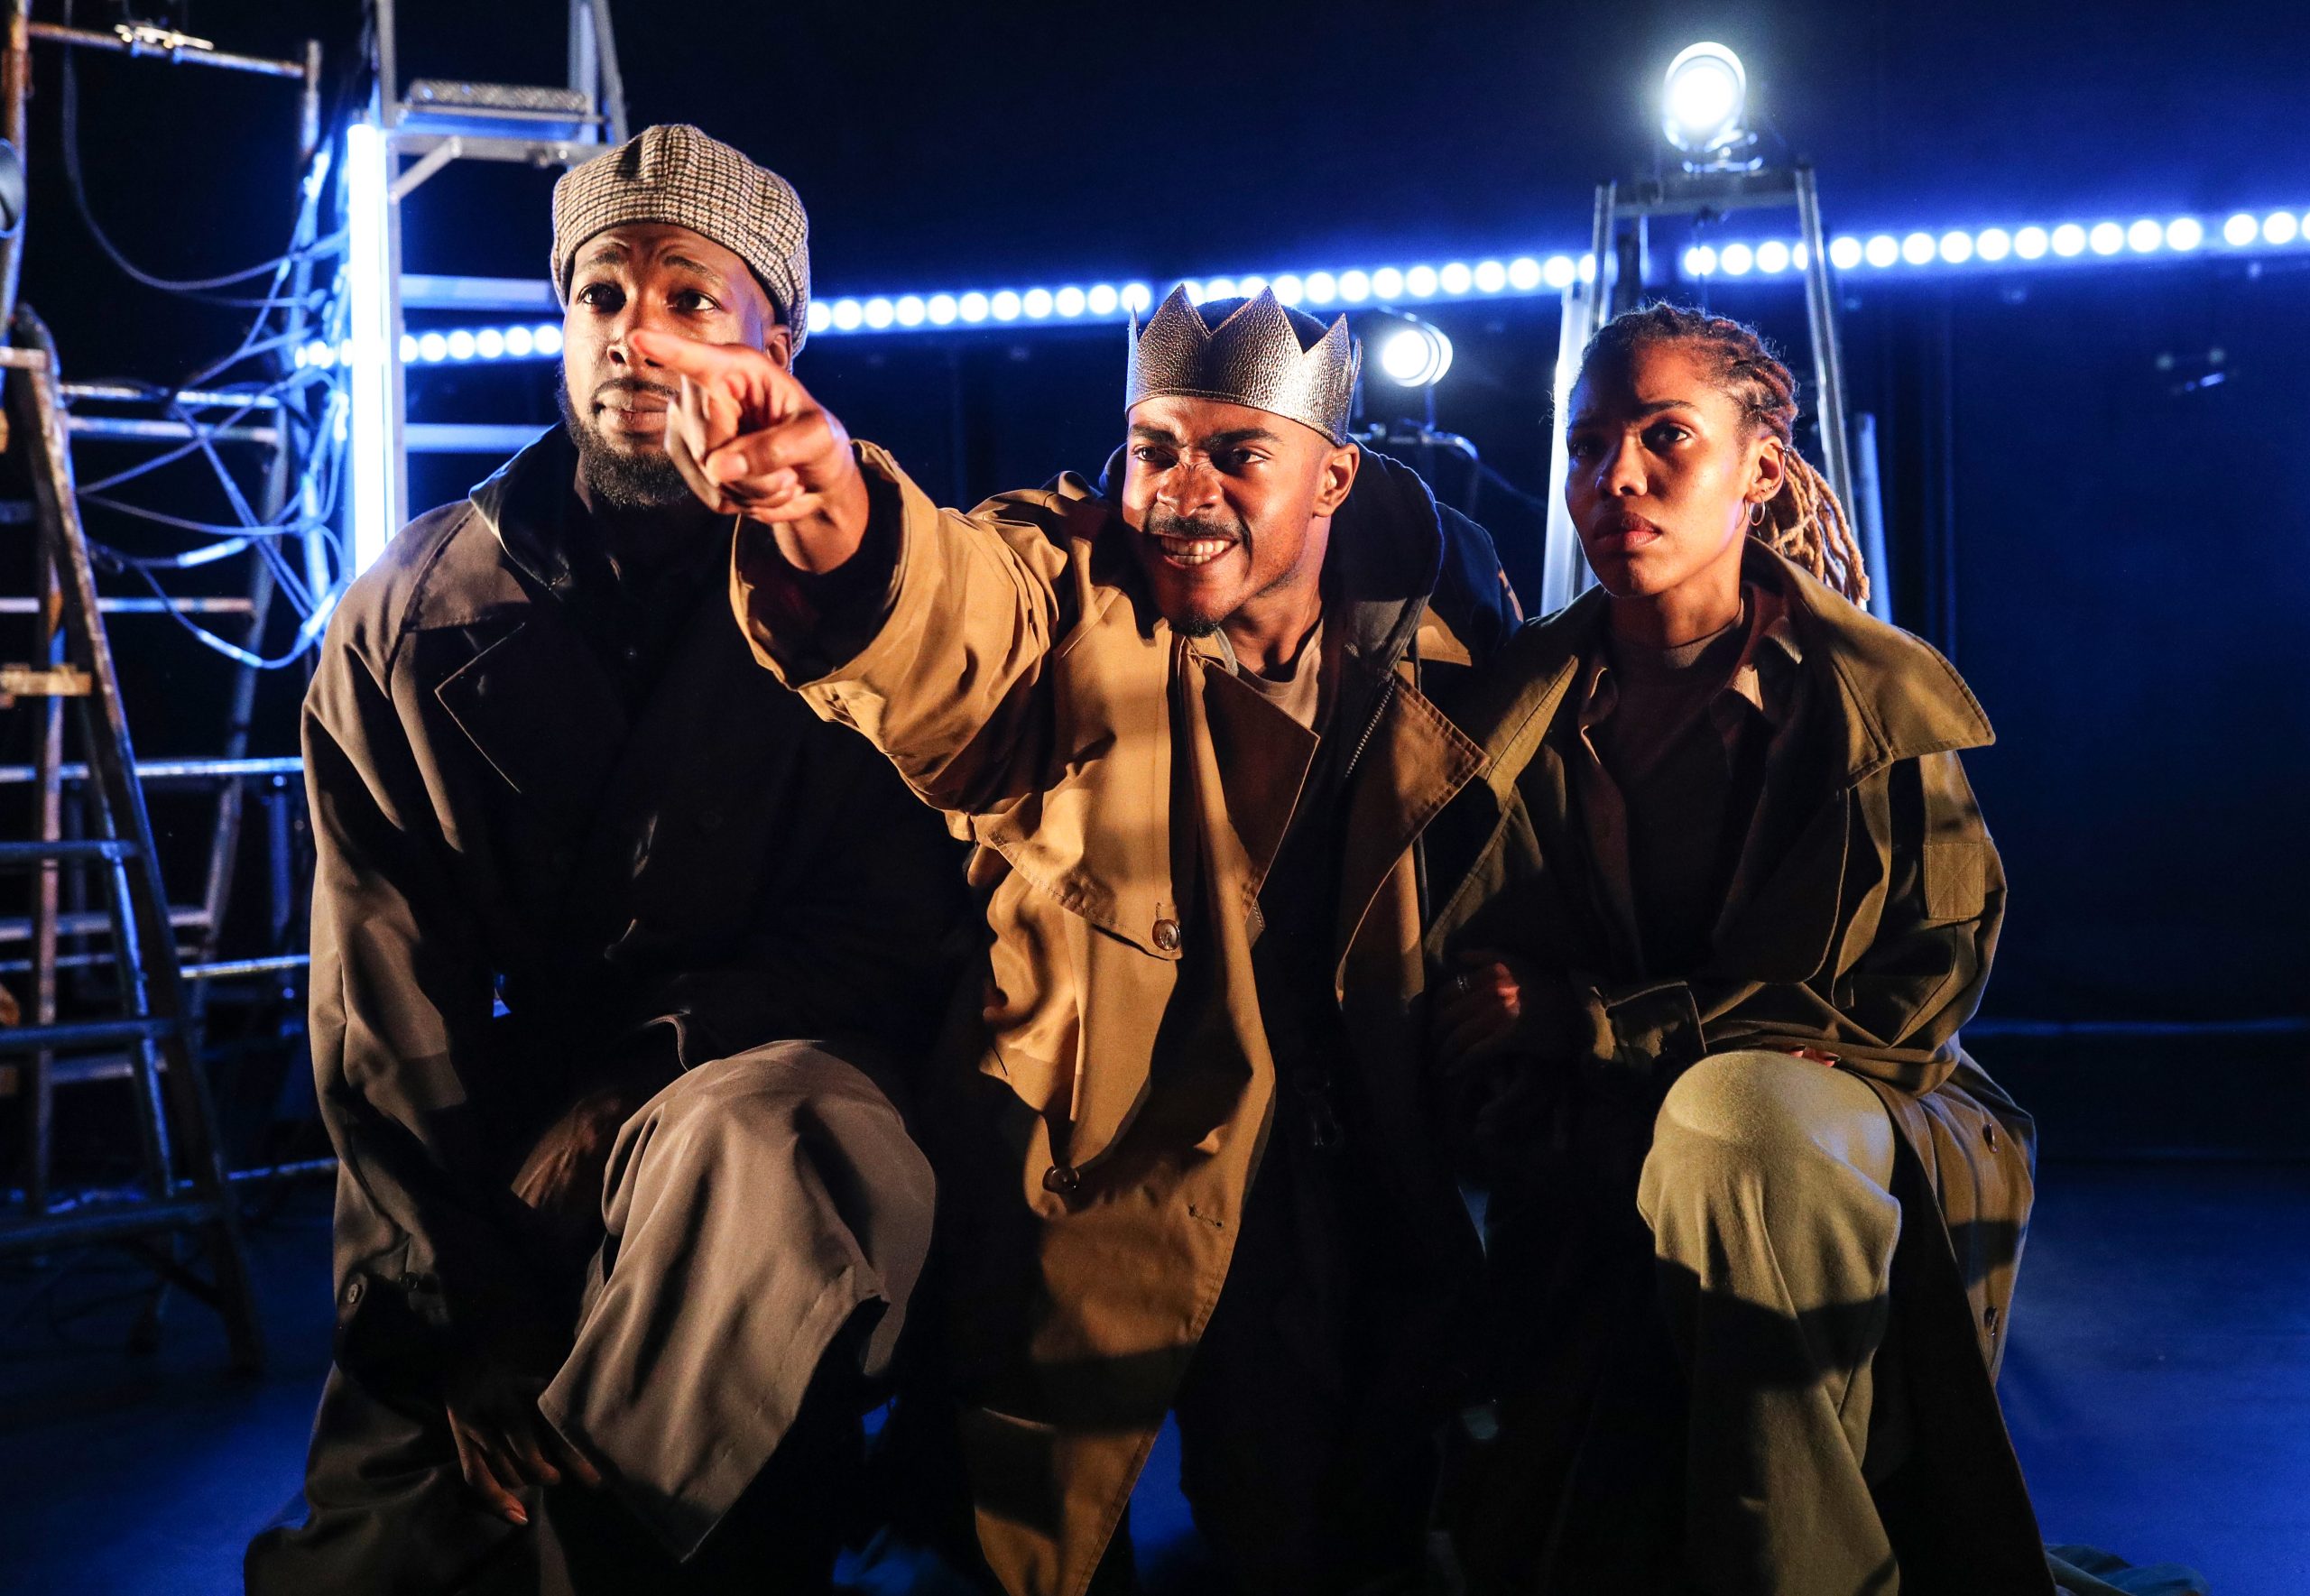 Three black actors on stage in Richard the Second at Omnibus Theatre. They are looking up and the centre performer is wearing a crown and pointing.